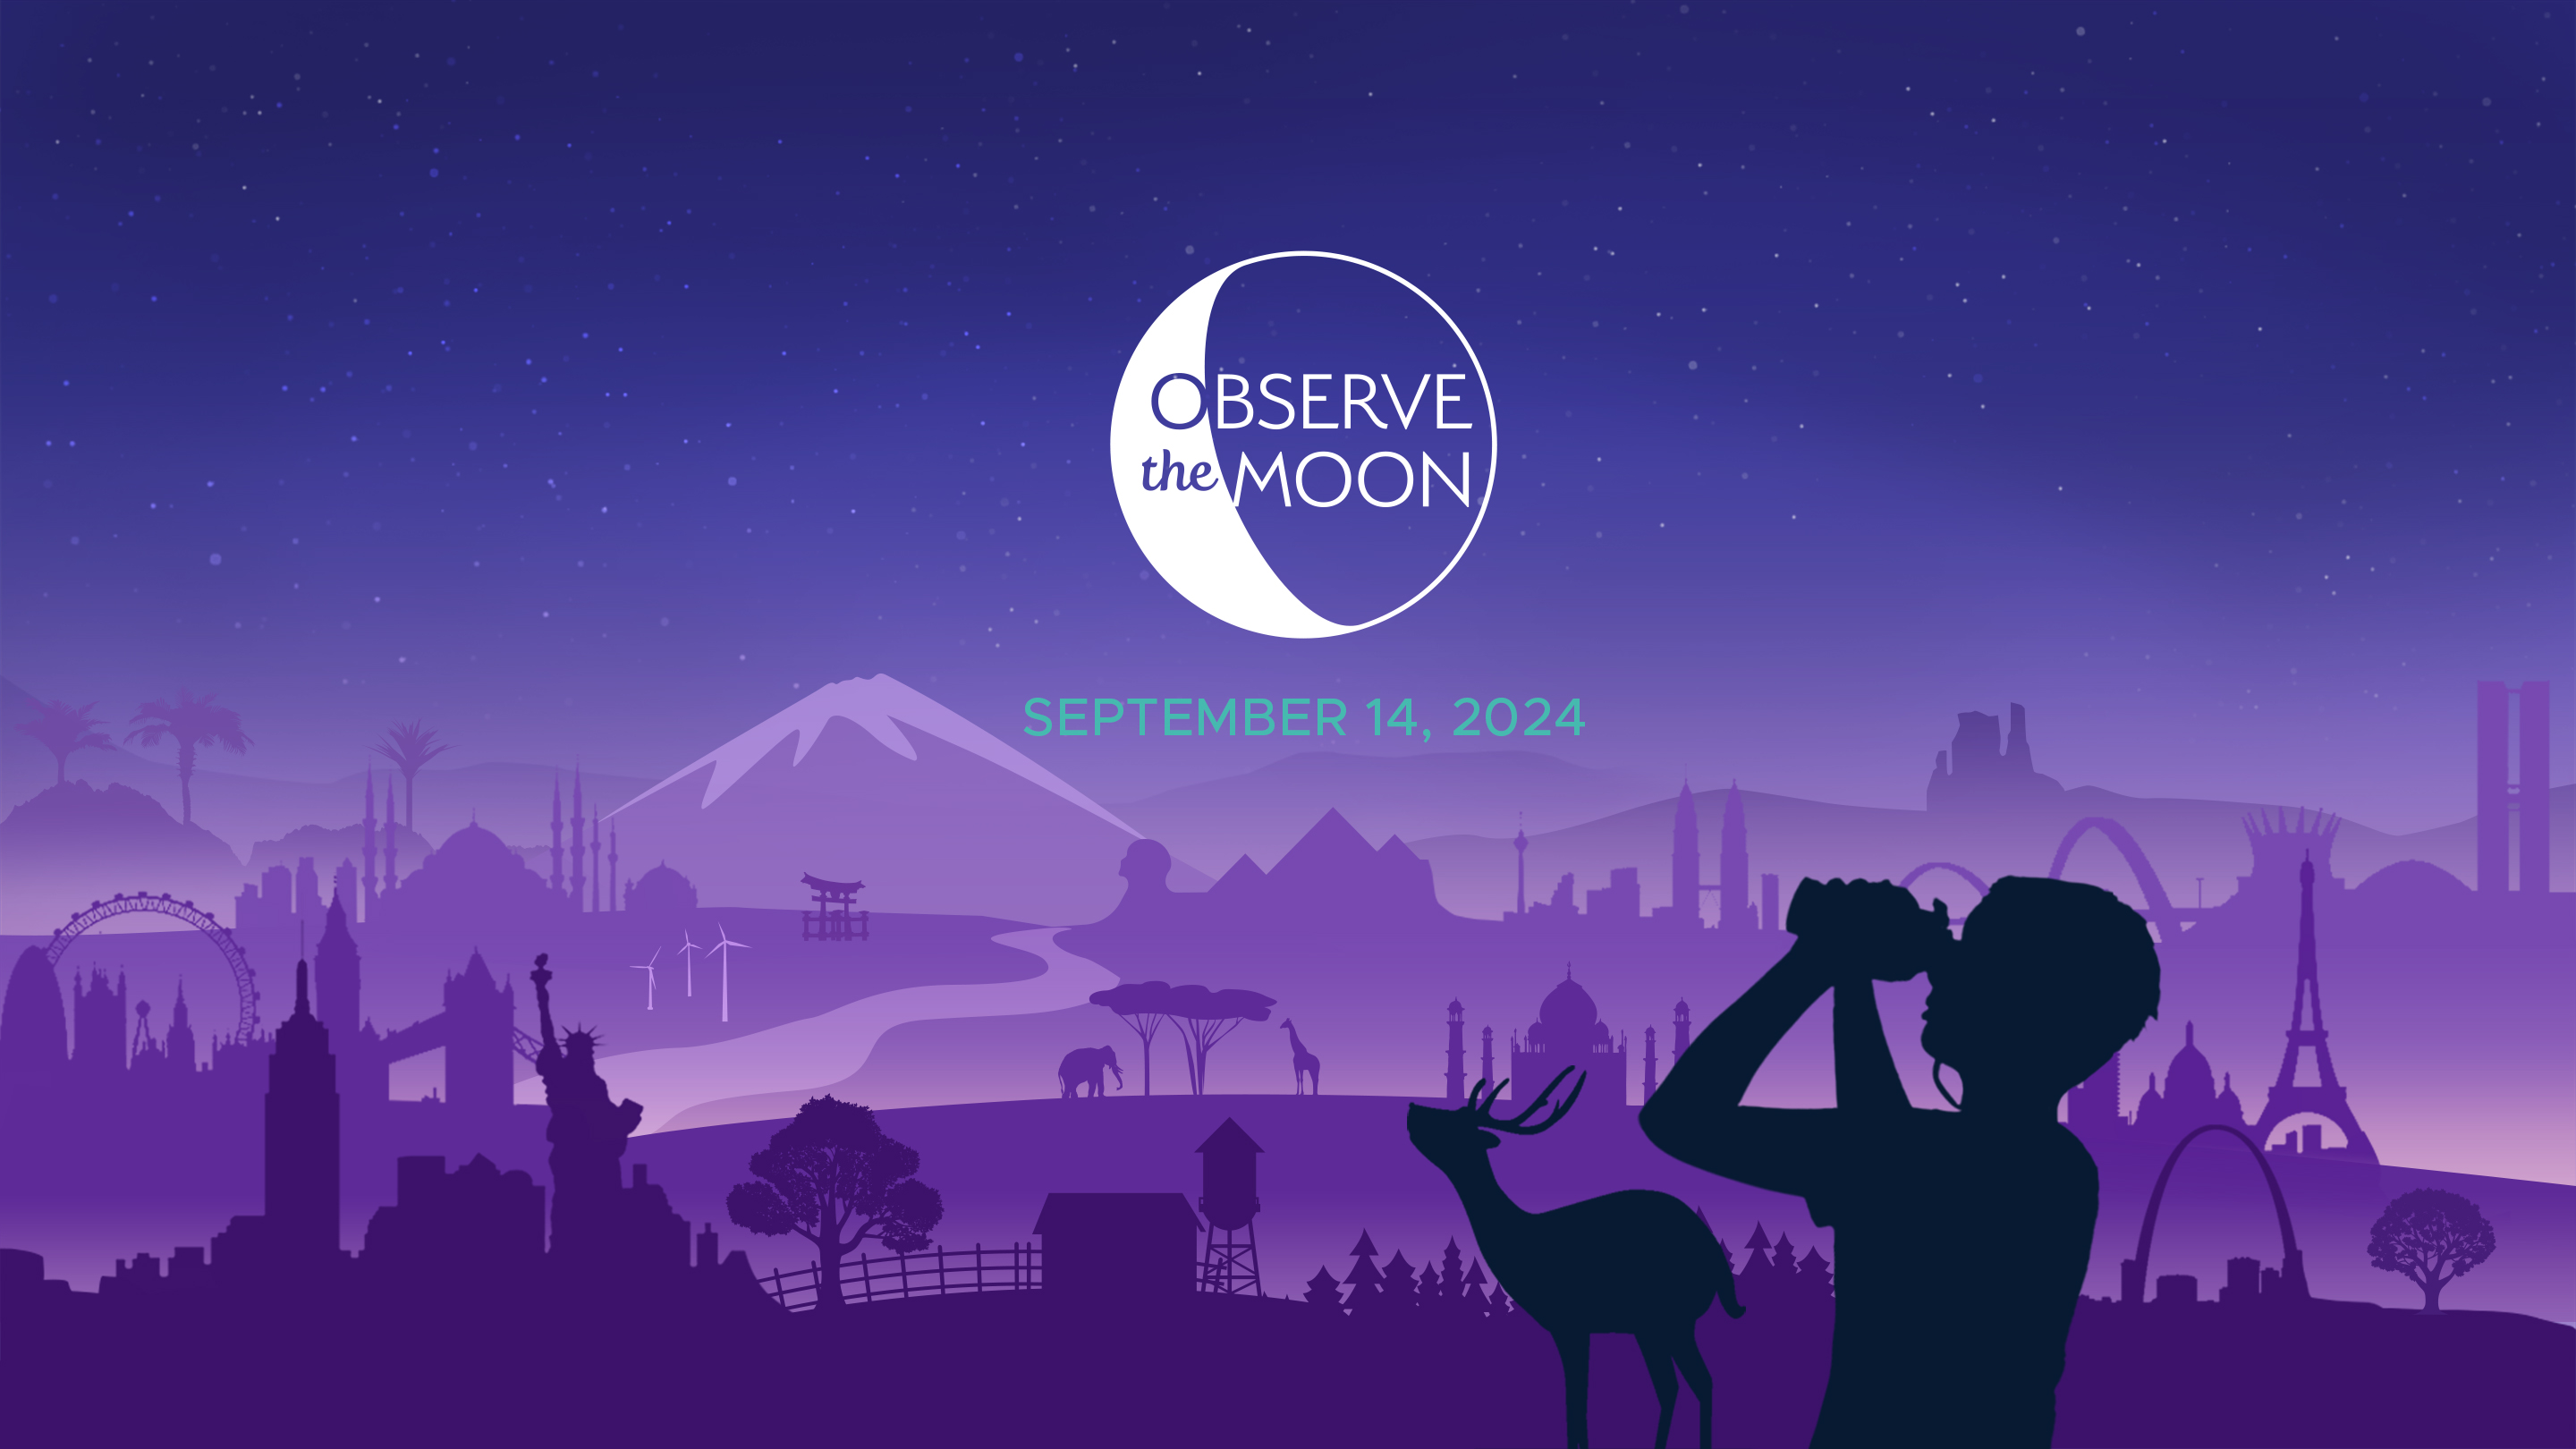 Illustration of imagined landscape with world landmarks, silhouette of a boy looking up at a graphical logo representing the Moon, with the title "Observe the Moon". Subtitle text reads, "September 14, 2024"